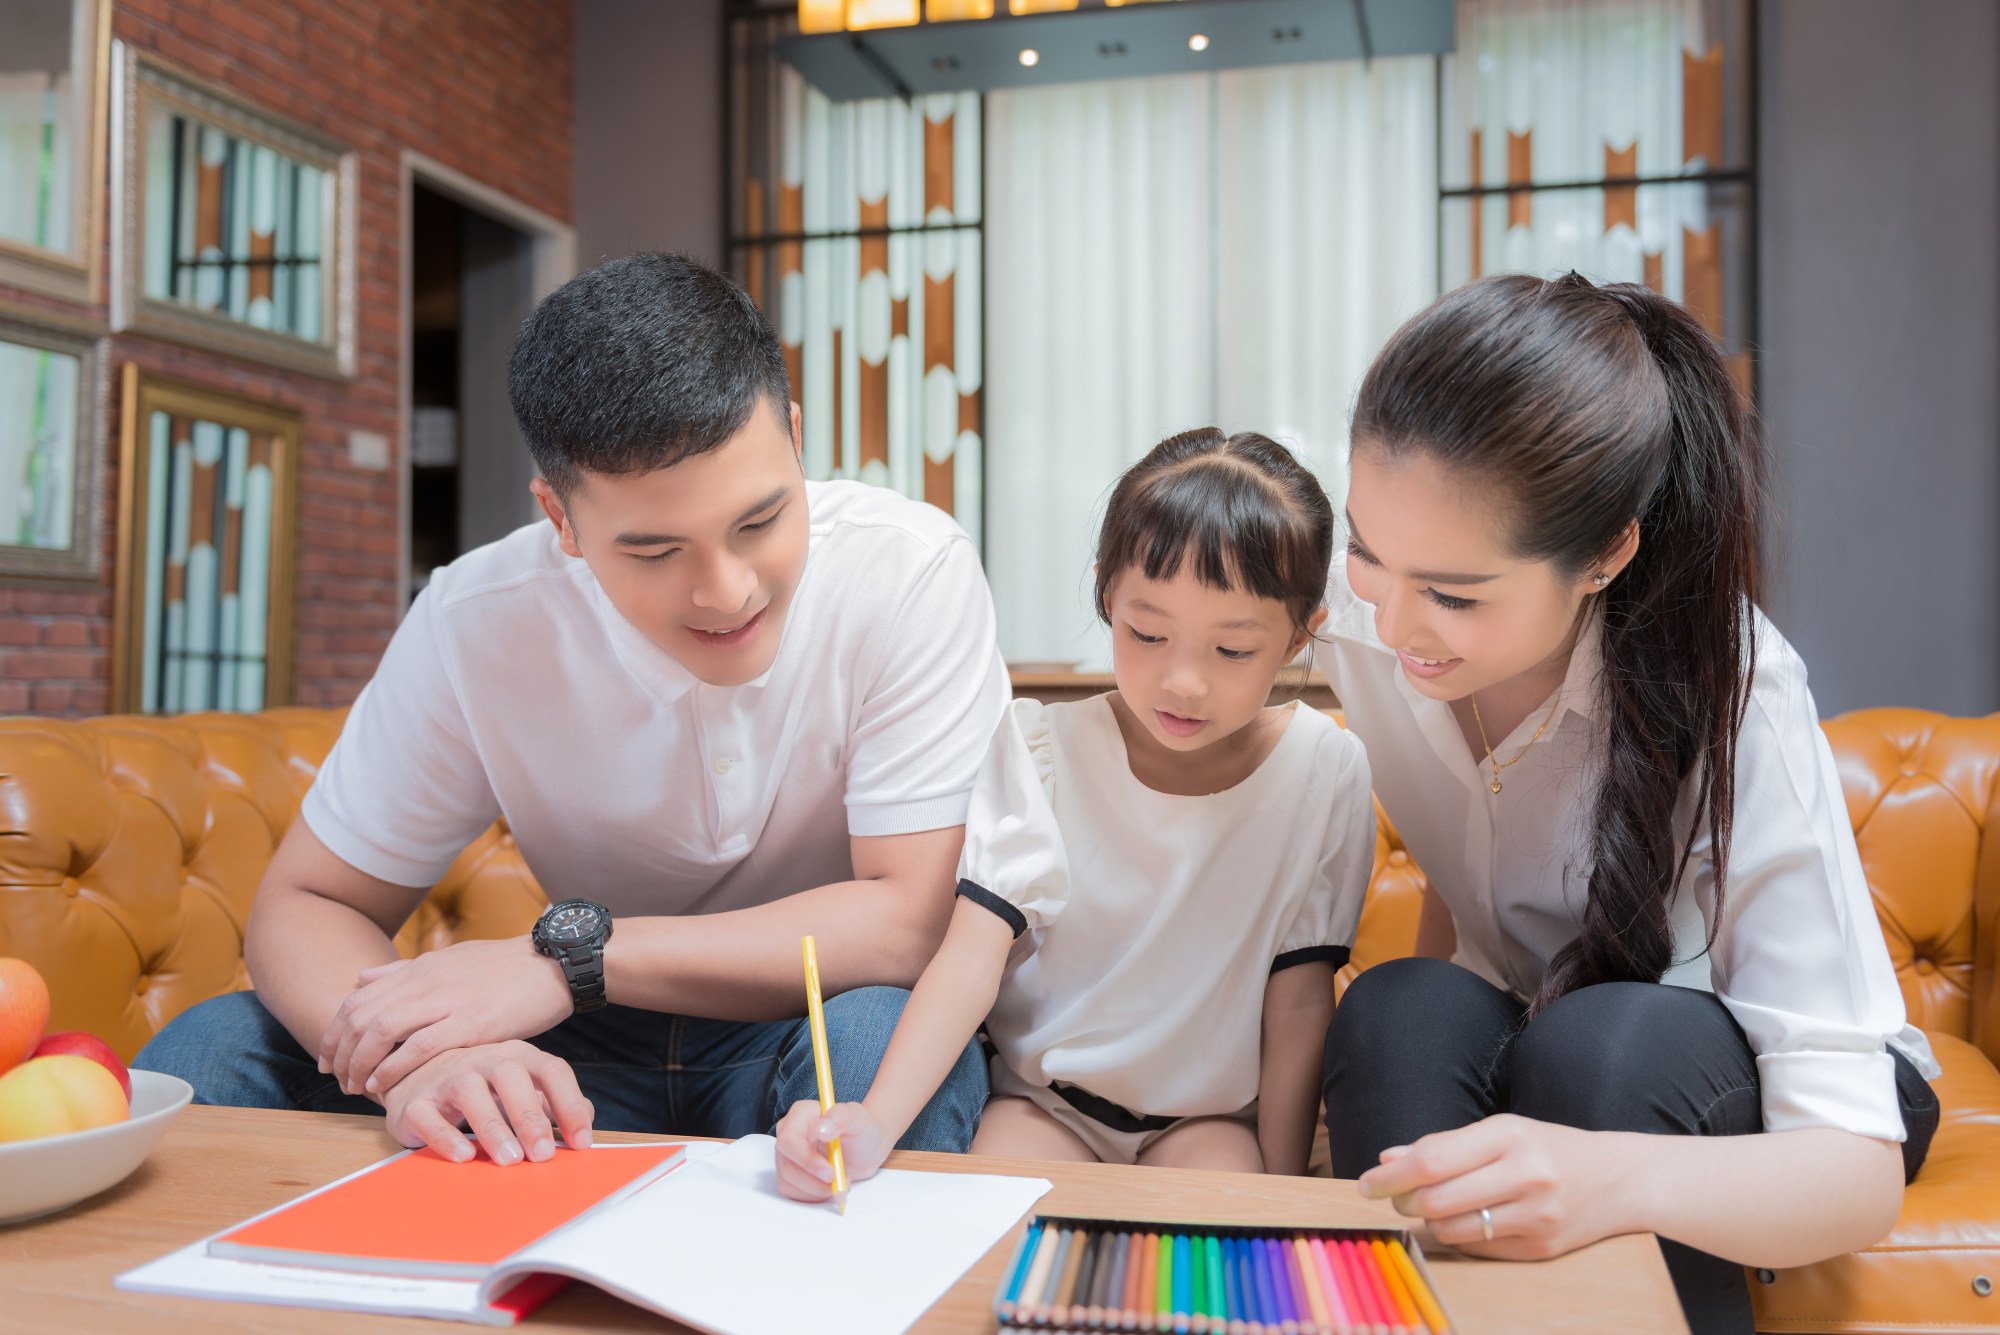 The story has ignited debate in China about teacher expectations around homework and the level of involvement required from parents. Photo: Shutterstock